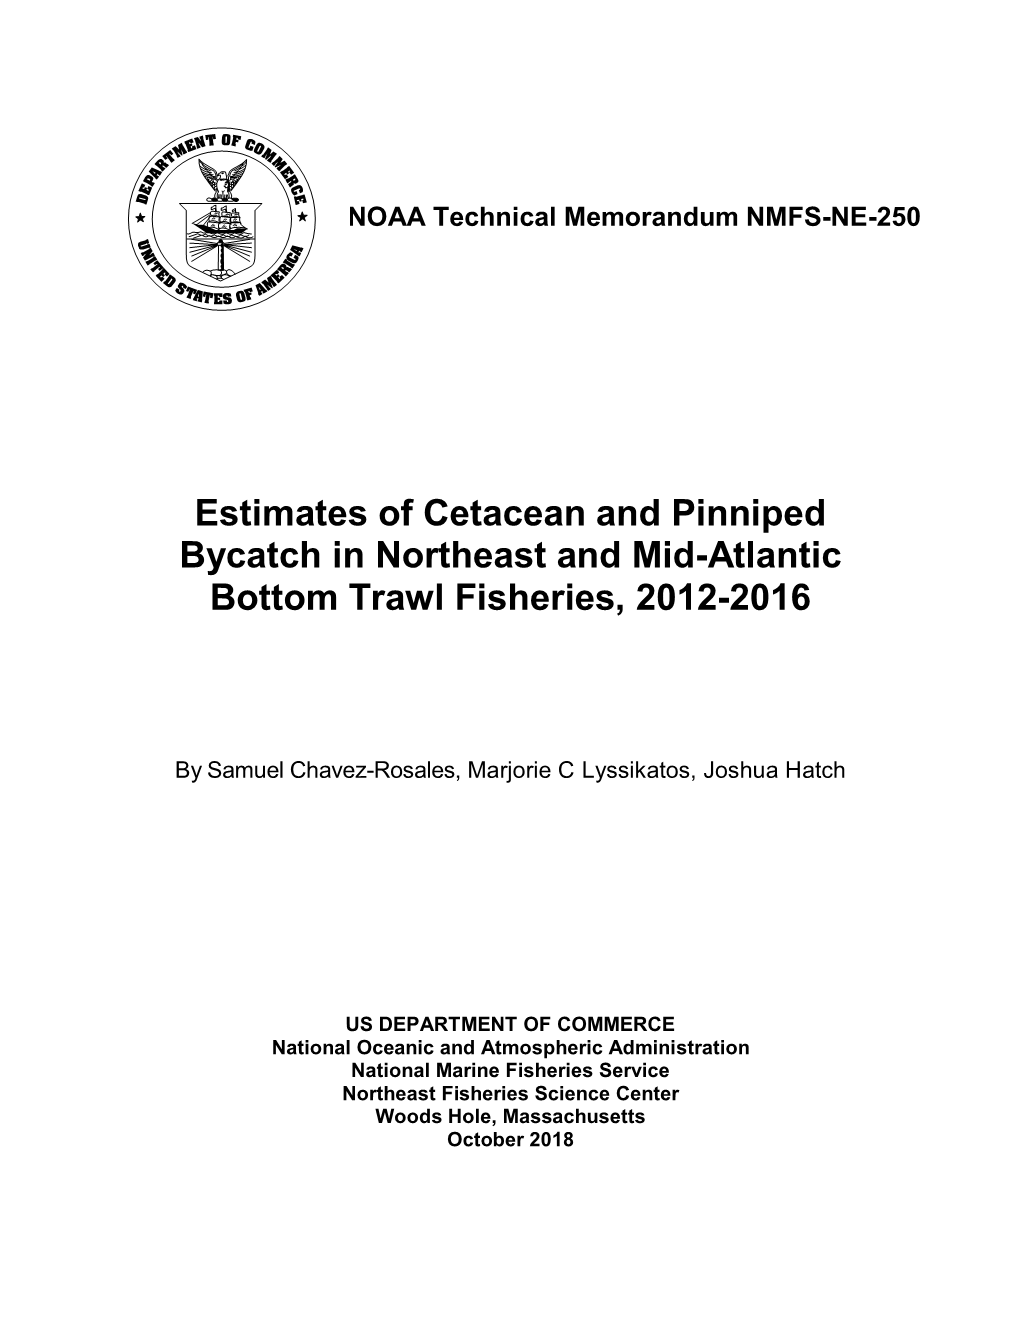 Estimates of Cetacean and Pinniped Bycatch in Northeast and Mid-Atlantic Bottom Trawl Fisheries, 2012-2016